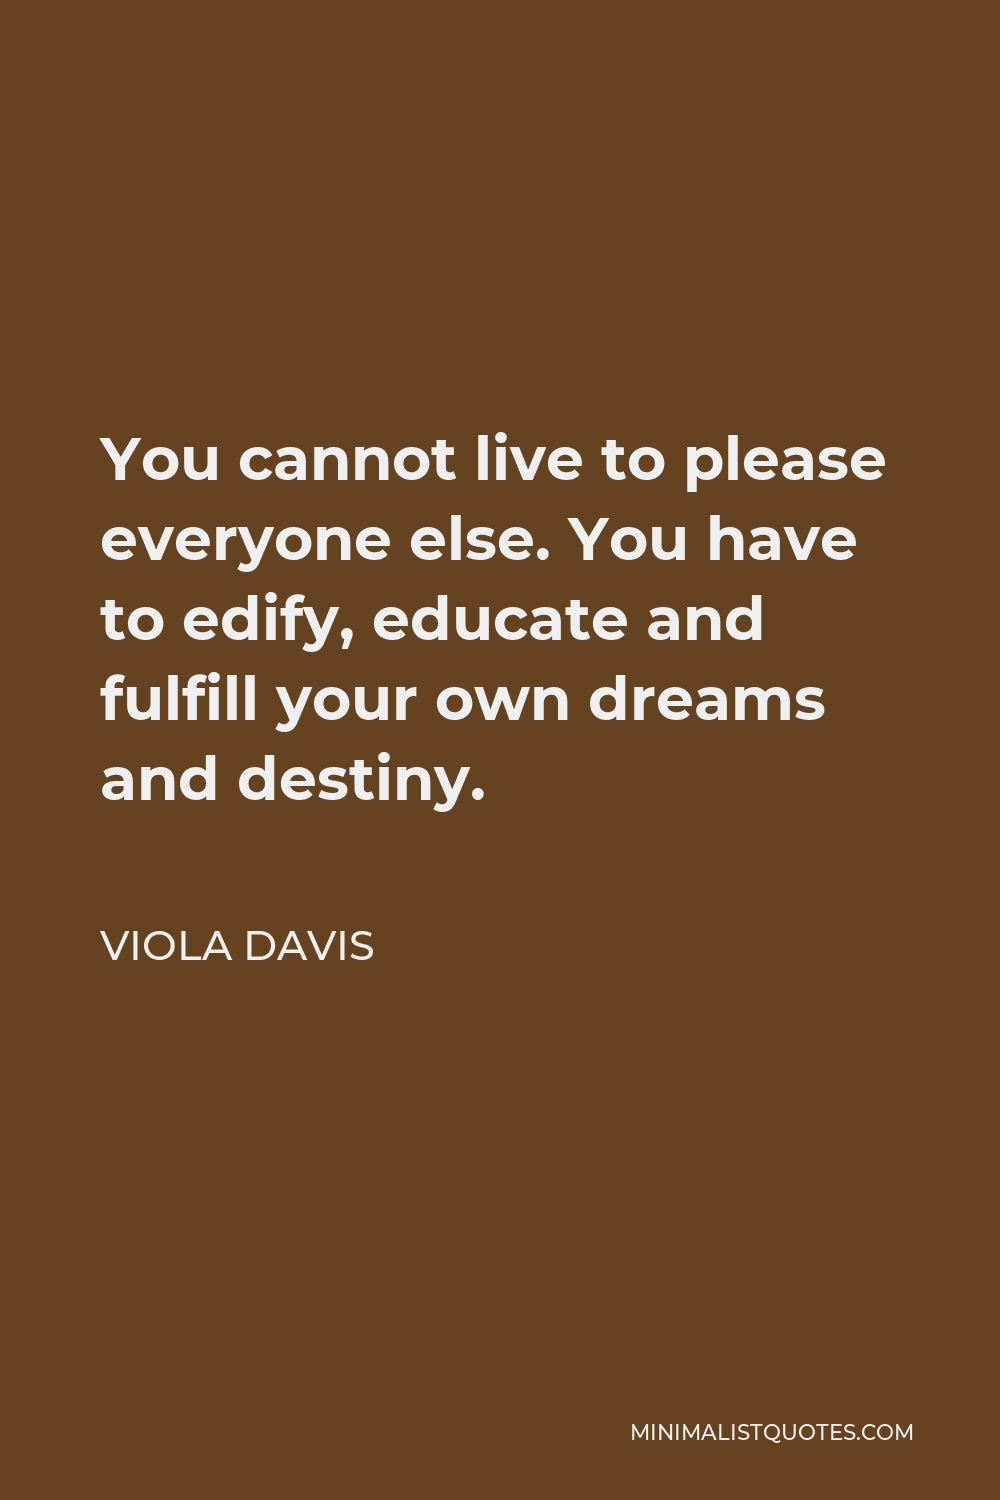 Viola Davis Quote - You cannot live to please everyone else. You have to edify, educate and fulfill your own dreams and destiny.